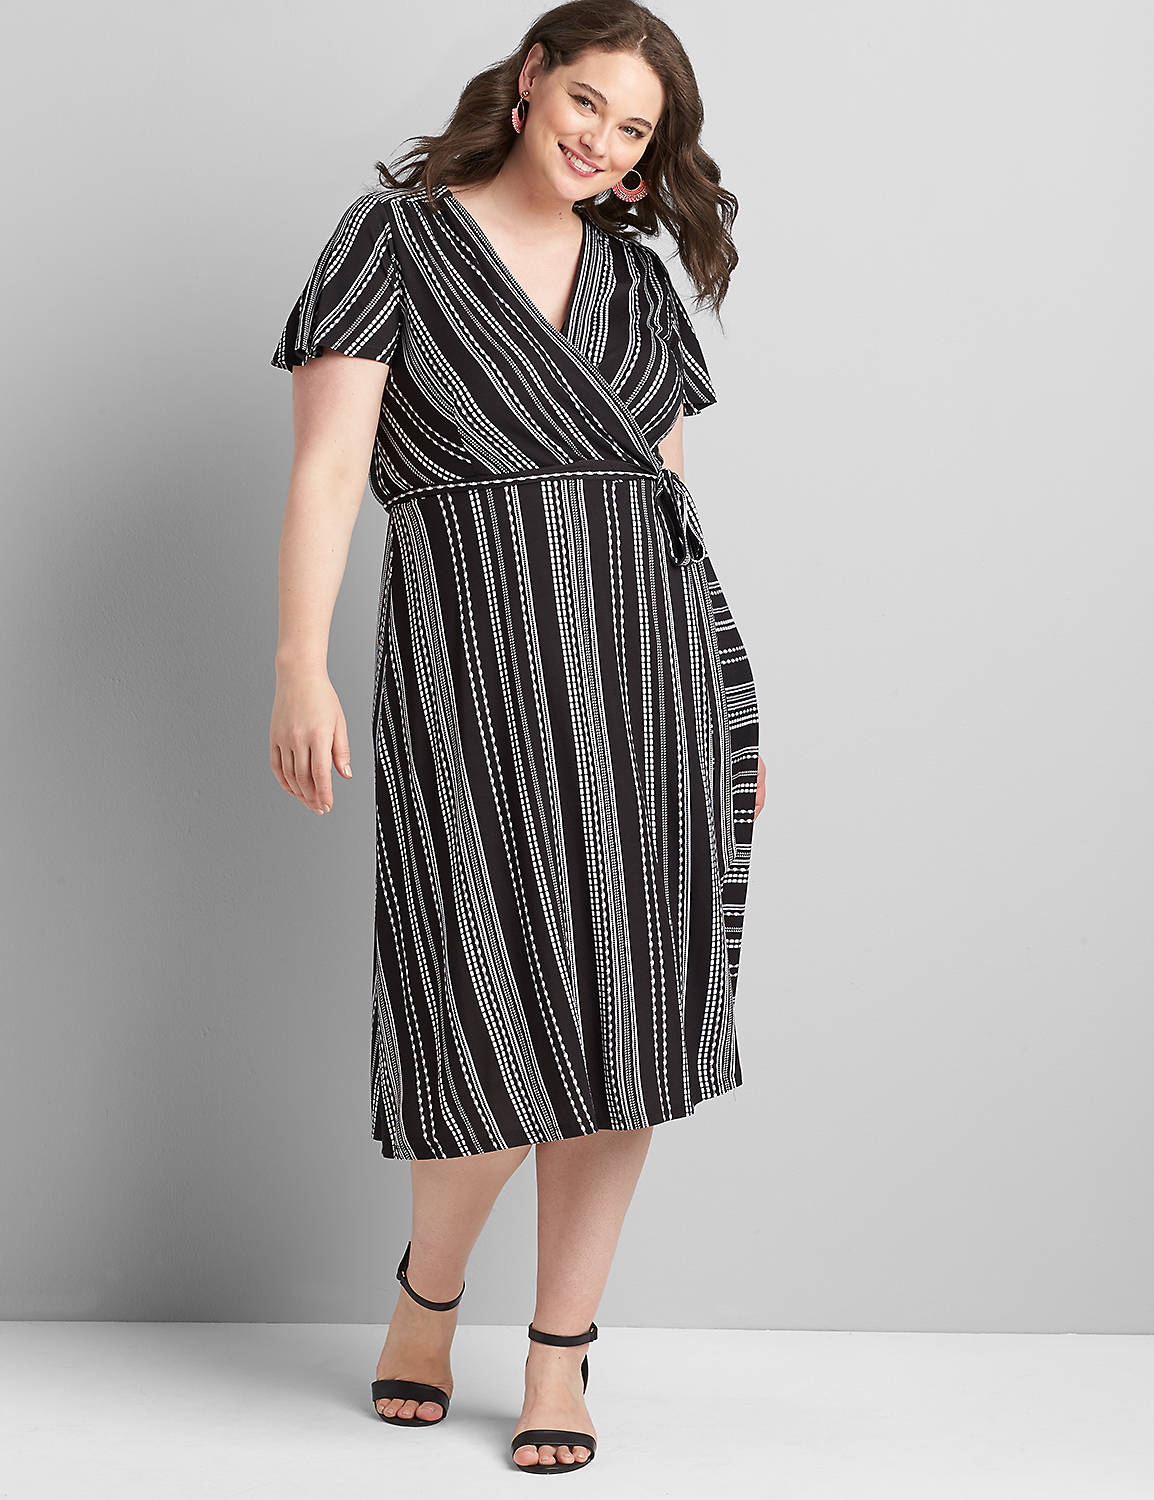 Crossover Striped Fit & Flare Dress Product Image 1